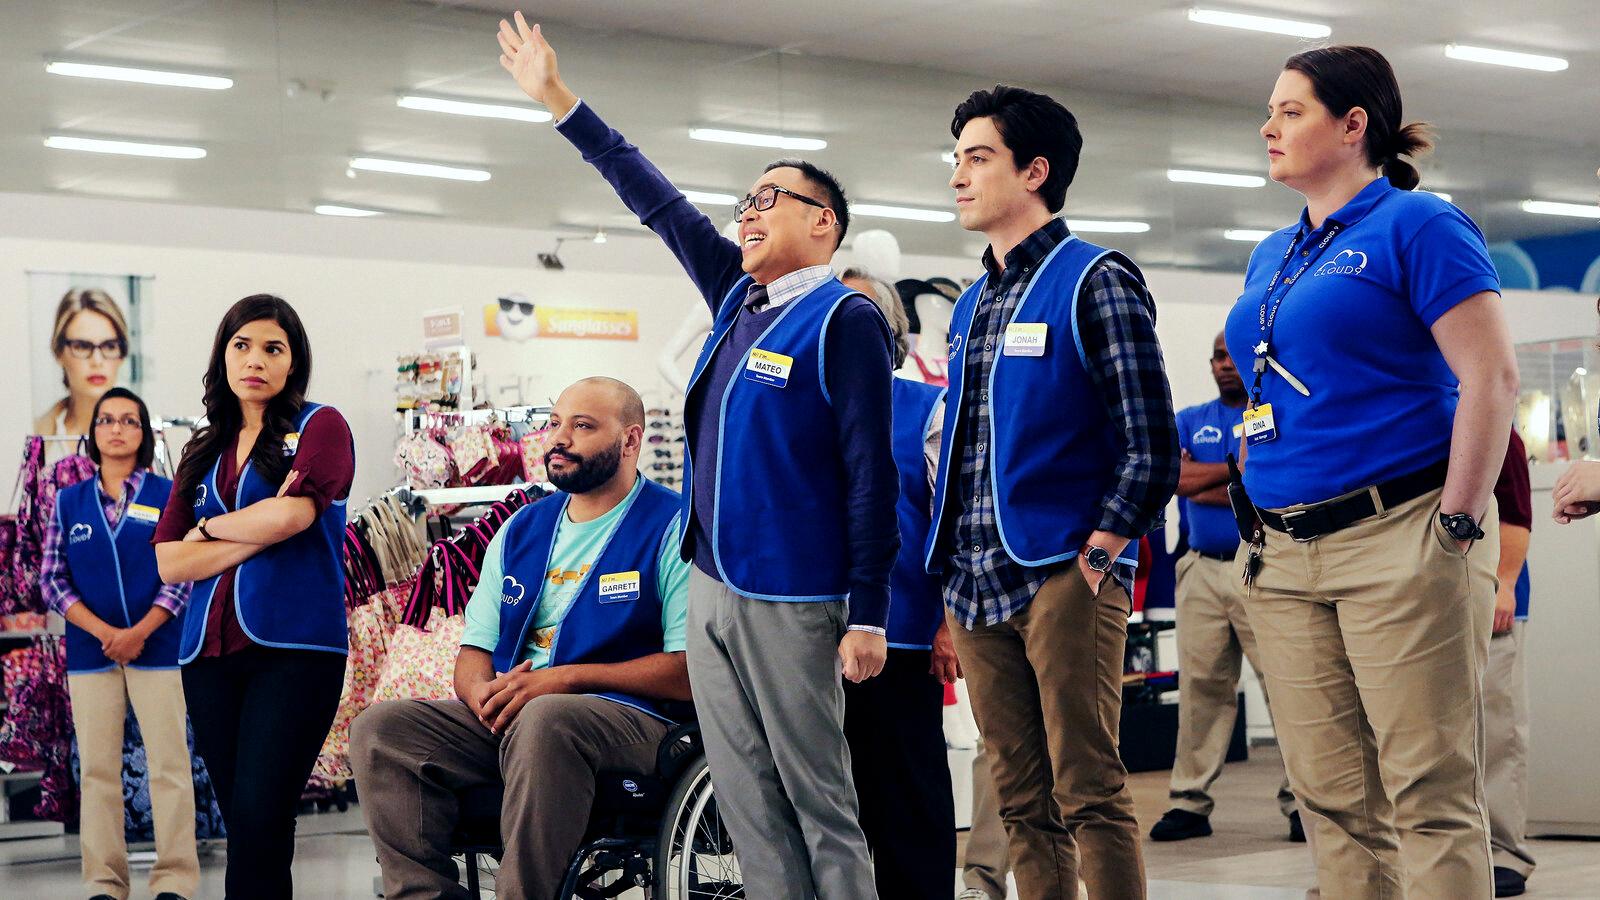 was superstore filmed in a real store